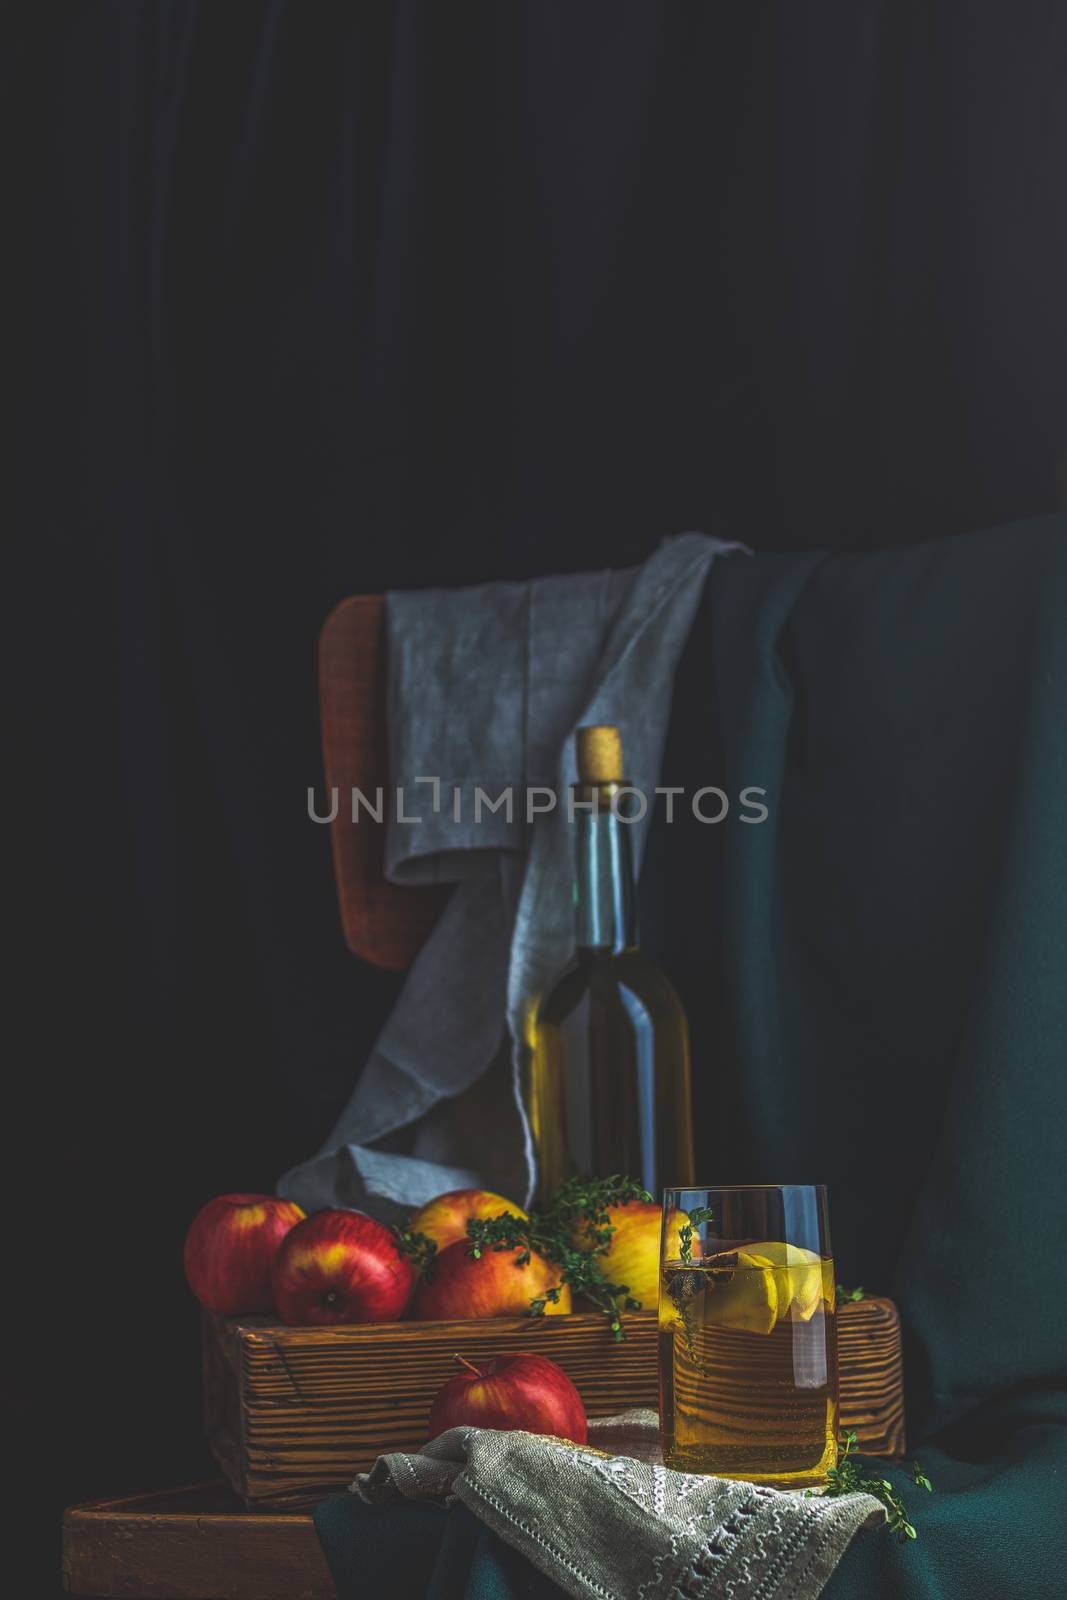 Apple cider vinegar or fruits tea with apple slices in glass with ripe red apples in box, dark vintage rustic style. Shallow depth of the field.